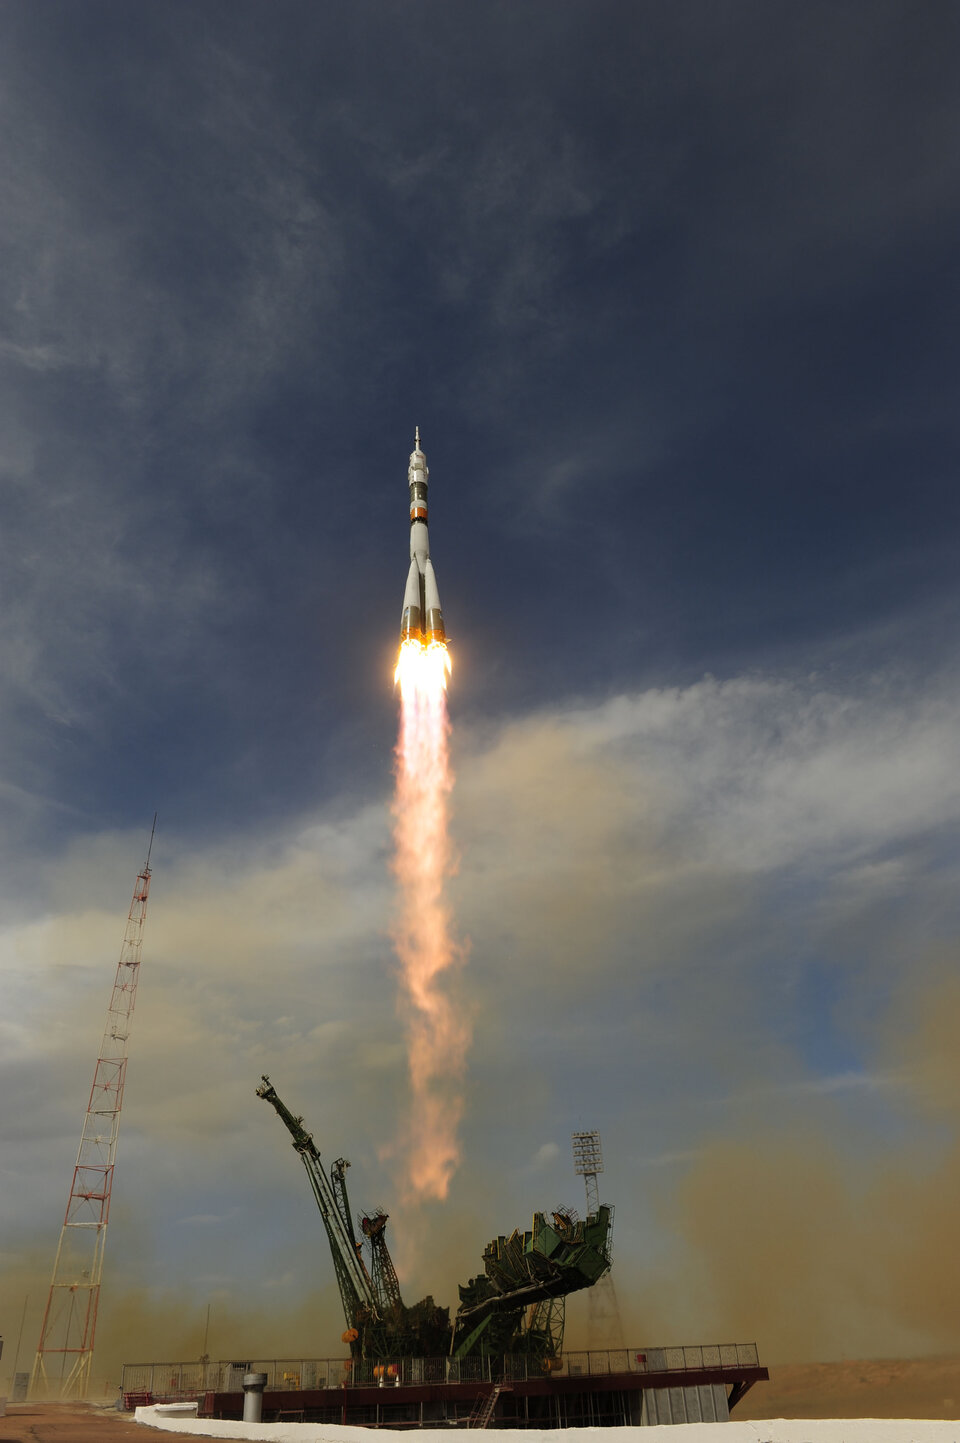 The Soyuz TMA-15 launched from Baikonur Cosmodrome on 27 May